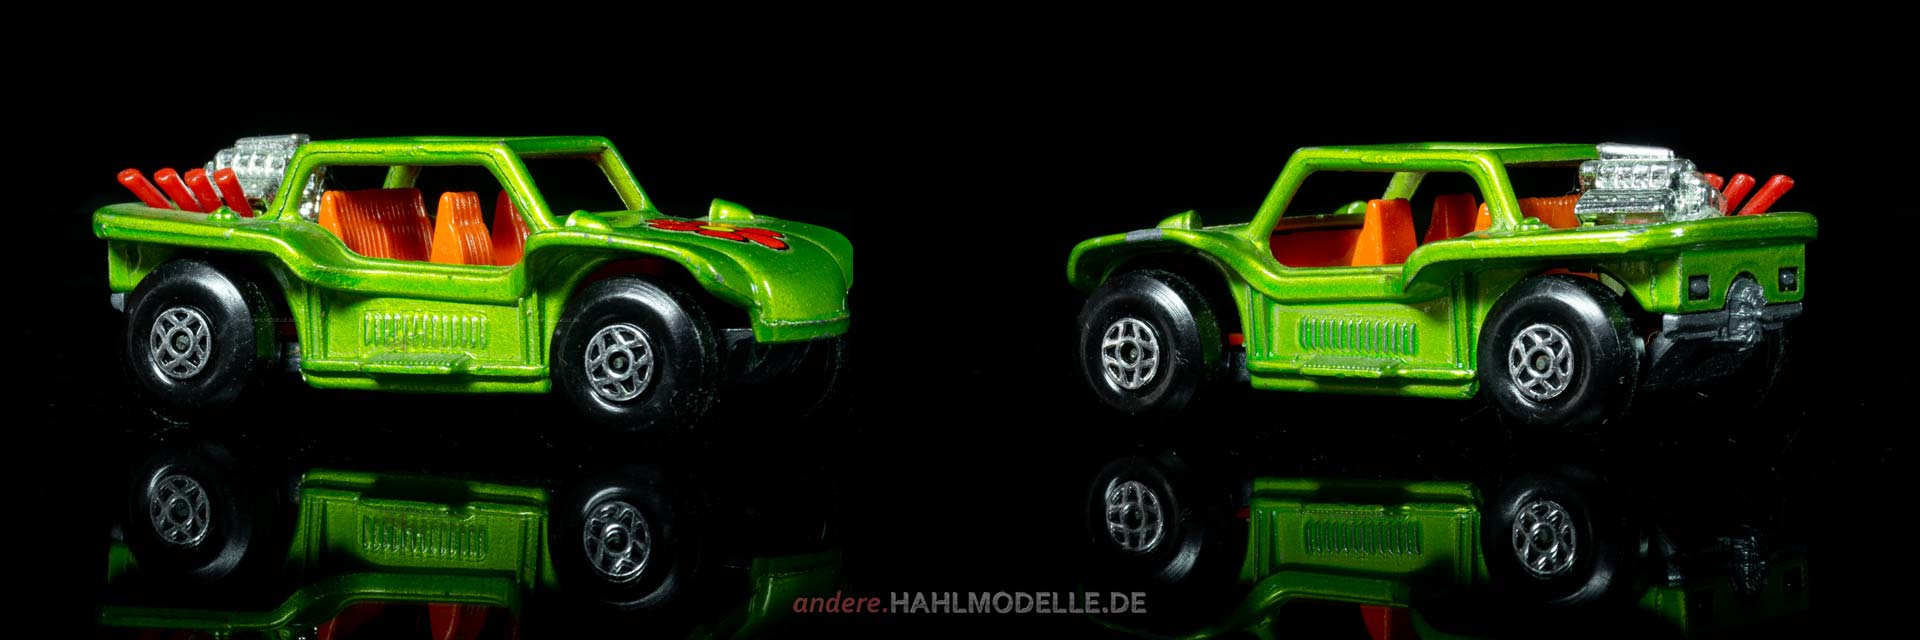 „Baja Buggy“ | Buggy | Lesney Products & Co. Ltd. | Matchbox Superfast | 1:49 | www.andere.hahlmodelle.de